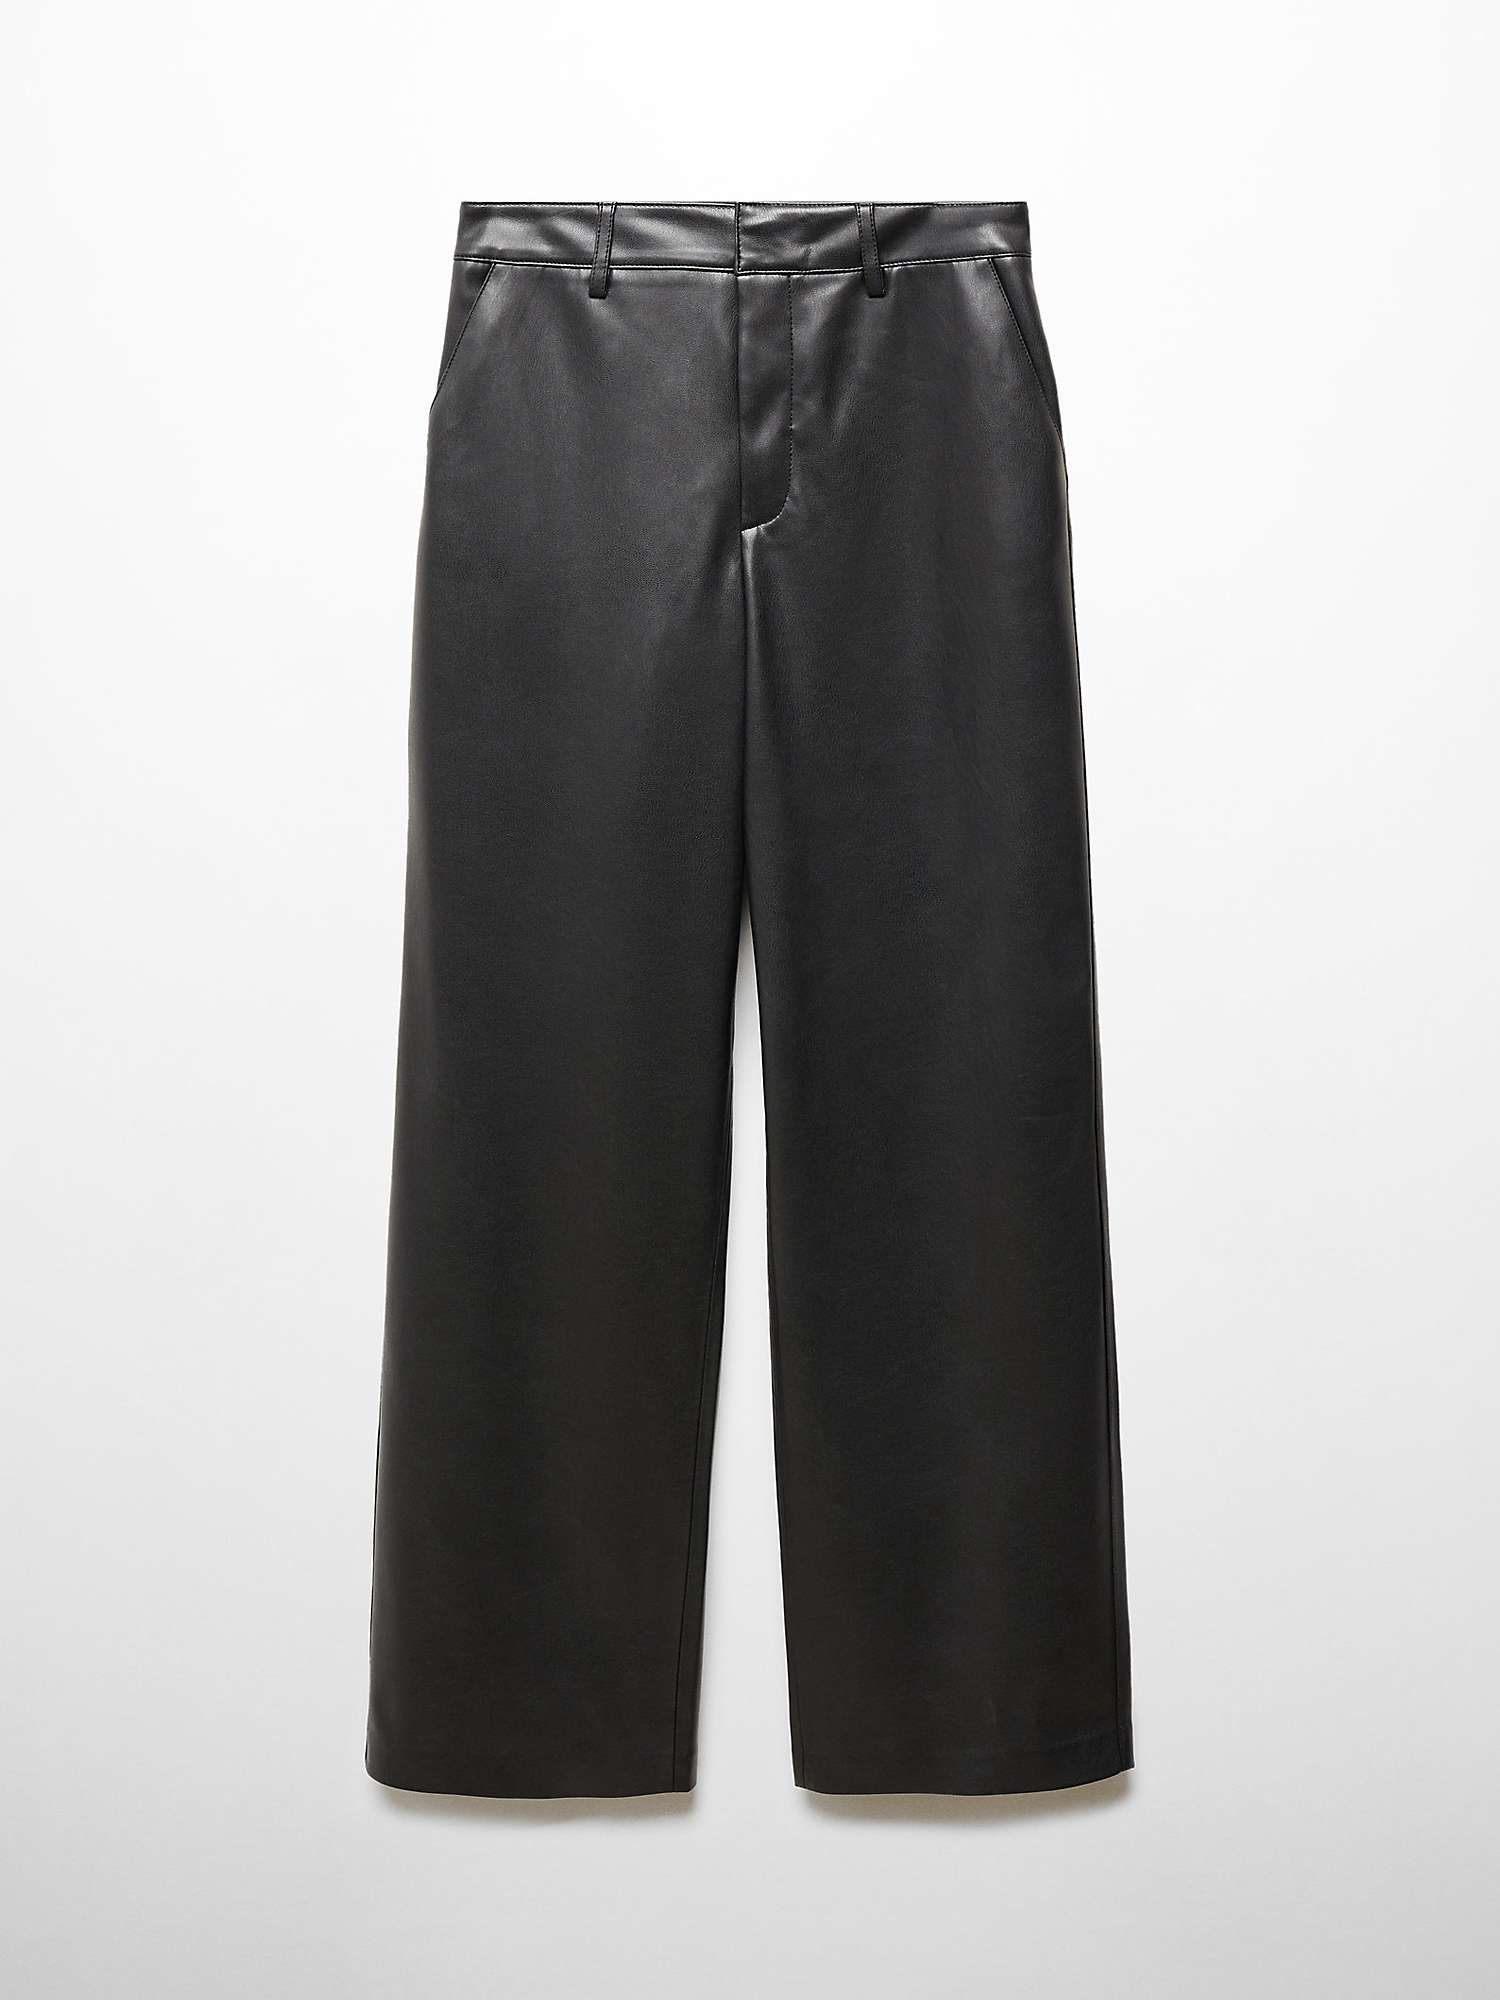 Buy Mango Mali Faux Leather High Waist Trousers, Black Online at johnlewis.com